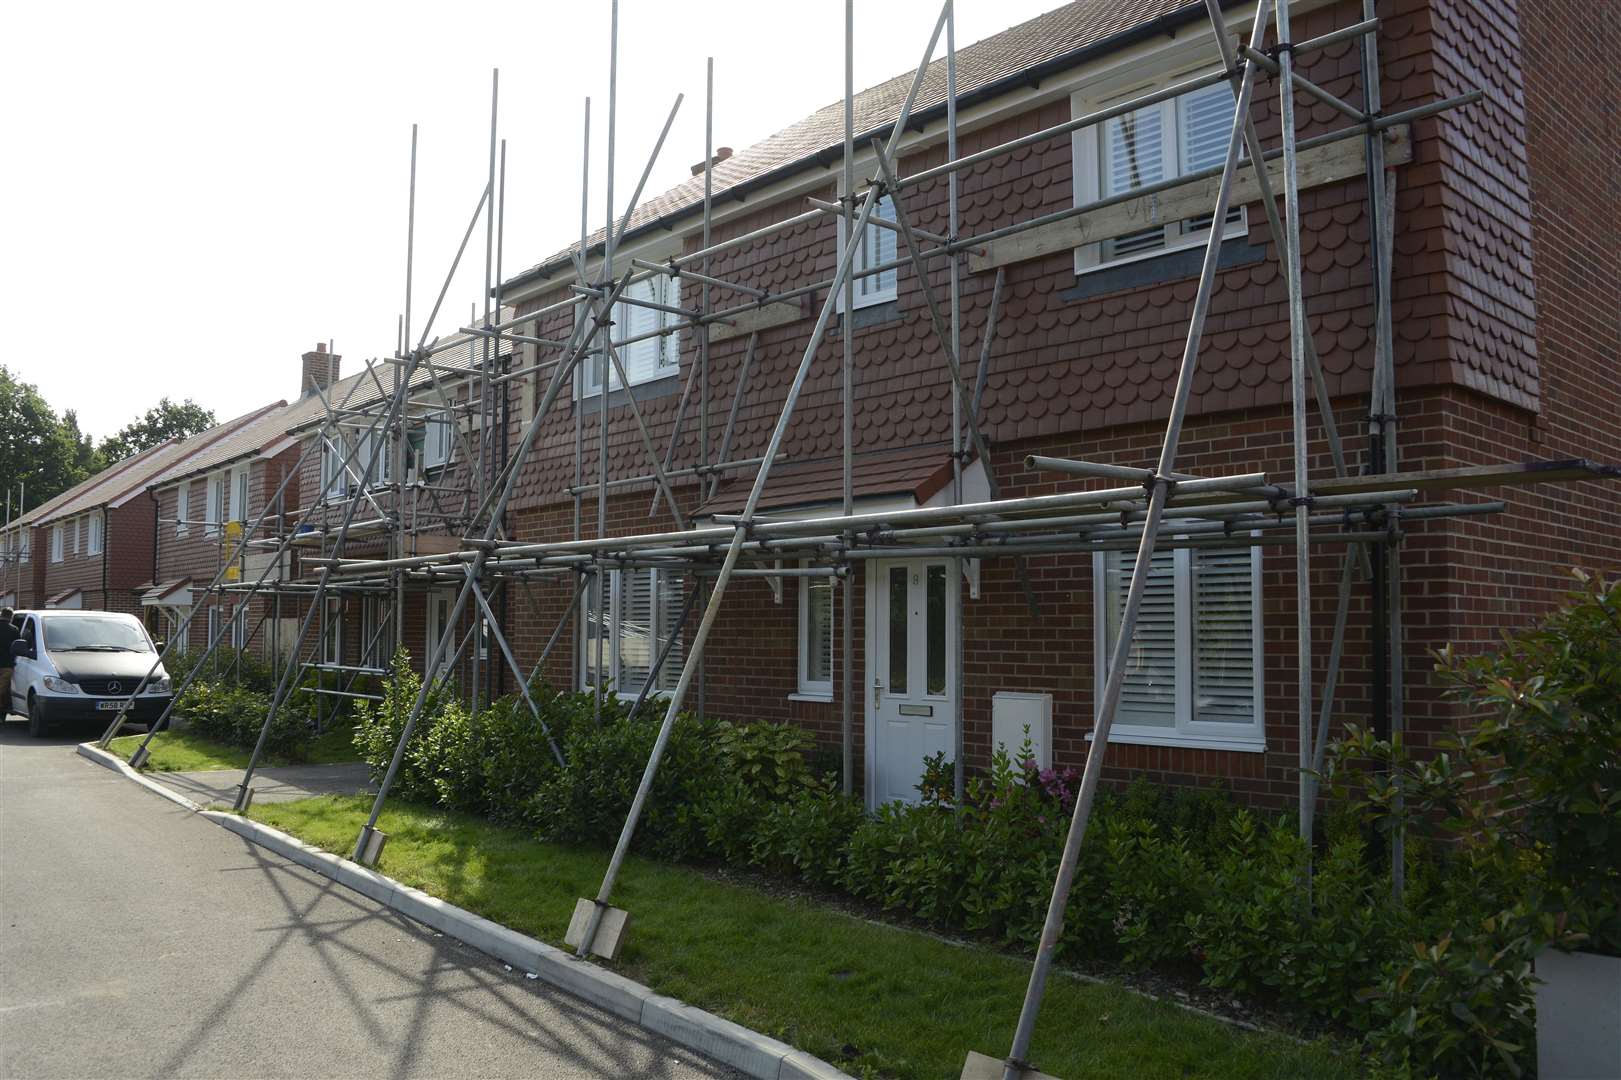 Scaffolding has been put up on seven homes in Limes Place. Picture: Paul Amos